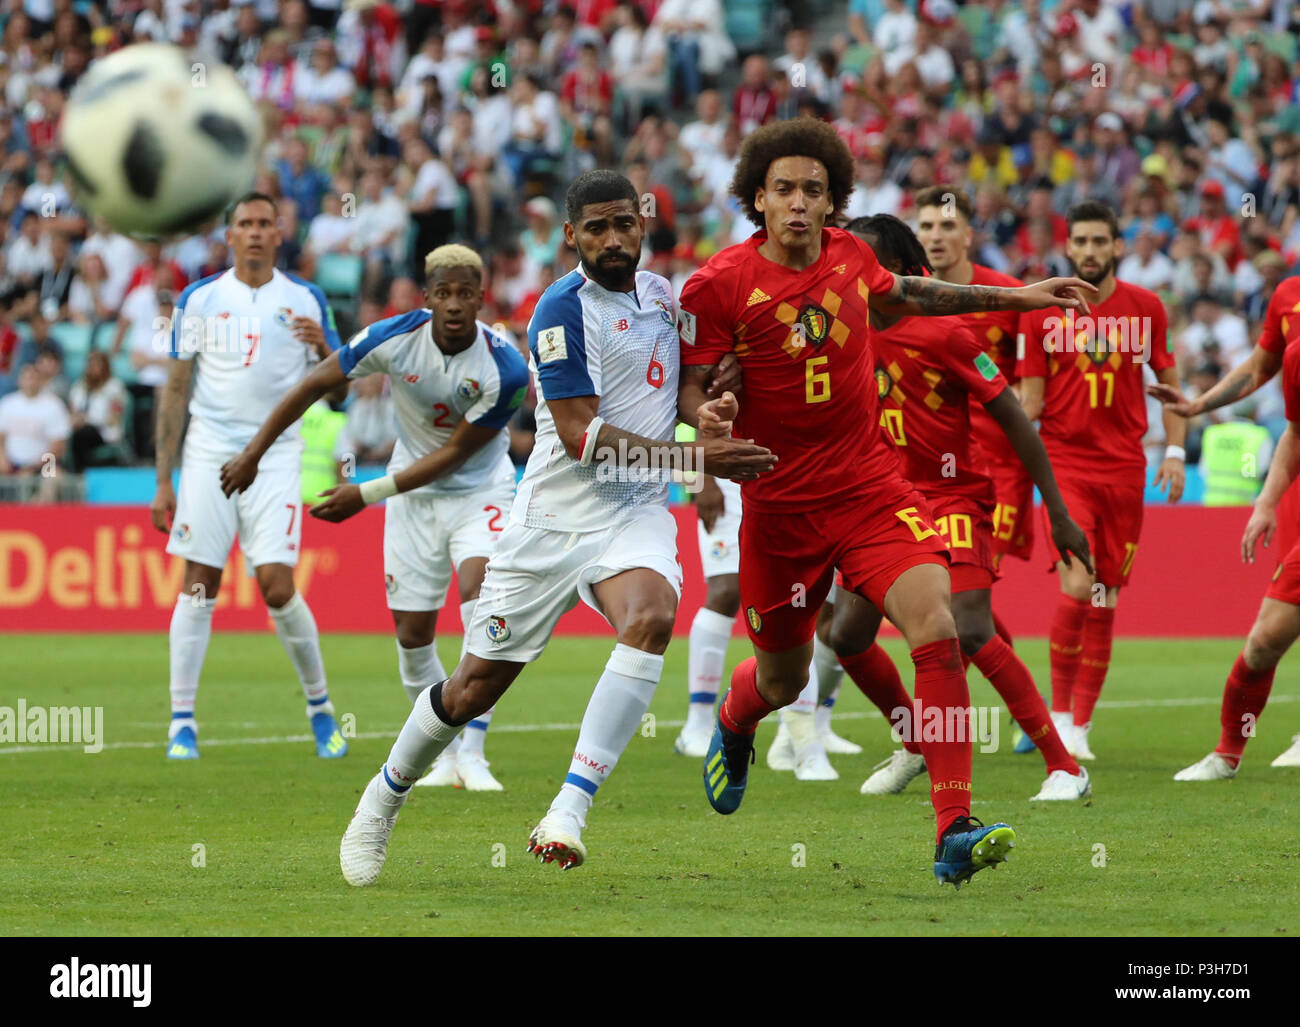 Sochi, Russia. 18th June, 2018. Axel Witsel (R front) of Belgium vies with Gabriel Gomez (L front) of Panama during a group G match between Belgium and Panama at the 2018 FIFA World Cup in Sochi, Russia, June 18, 2018. Credit: Bai Xueqi/Xinhua/Alamy Live News Stock Photo